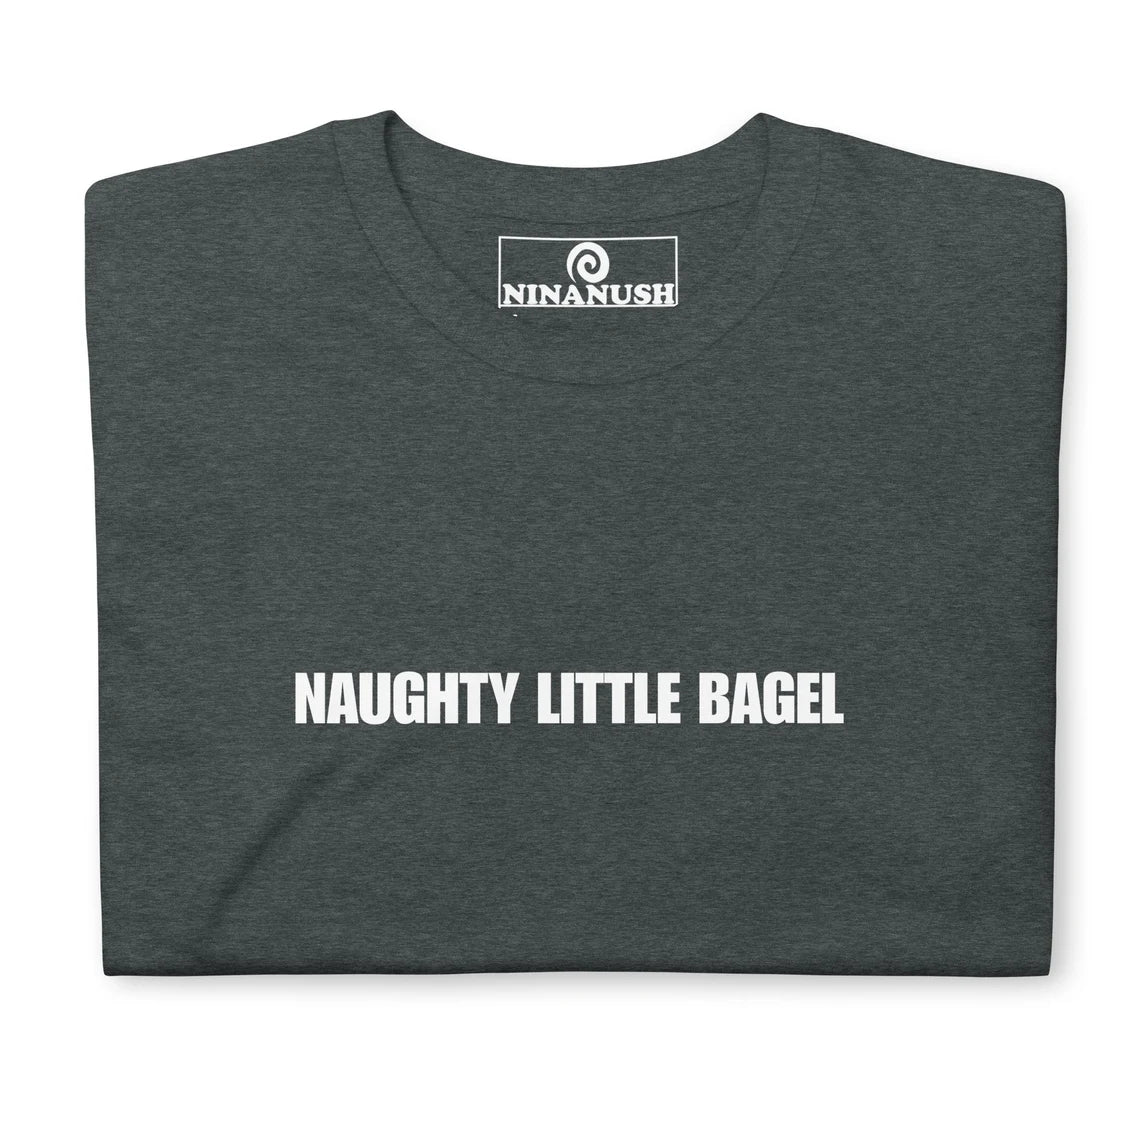 Dark gray funny foodie t-shirt for bagel lovers - Unique and funky naughty little bagel t-shirt. Make a statement and eat bagels in style in this funny foodie t-shirt for bagel lovers. It's soft, comfortable and made just for you or the naughty little bagel in your life. Give it as a funny gift for bagel enthusiasts or wear it as weird everyday foodie streetwear.